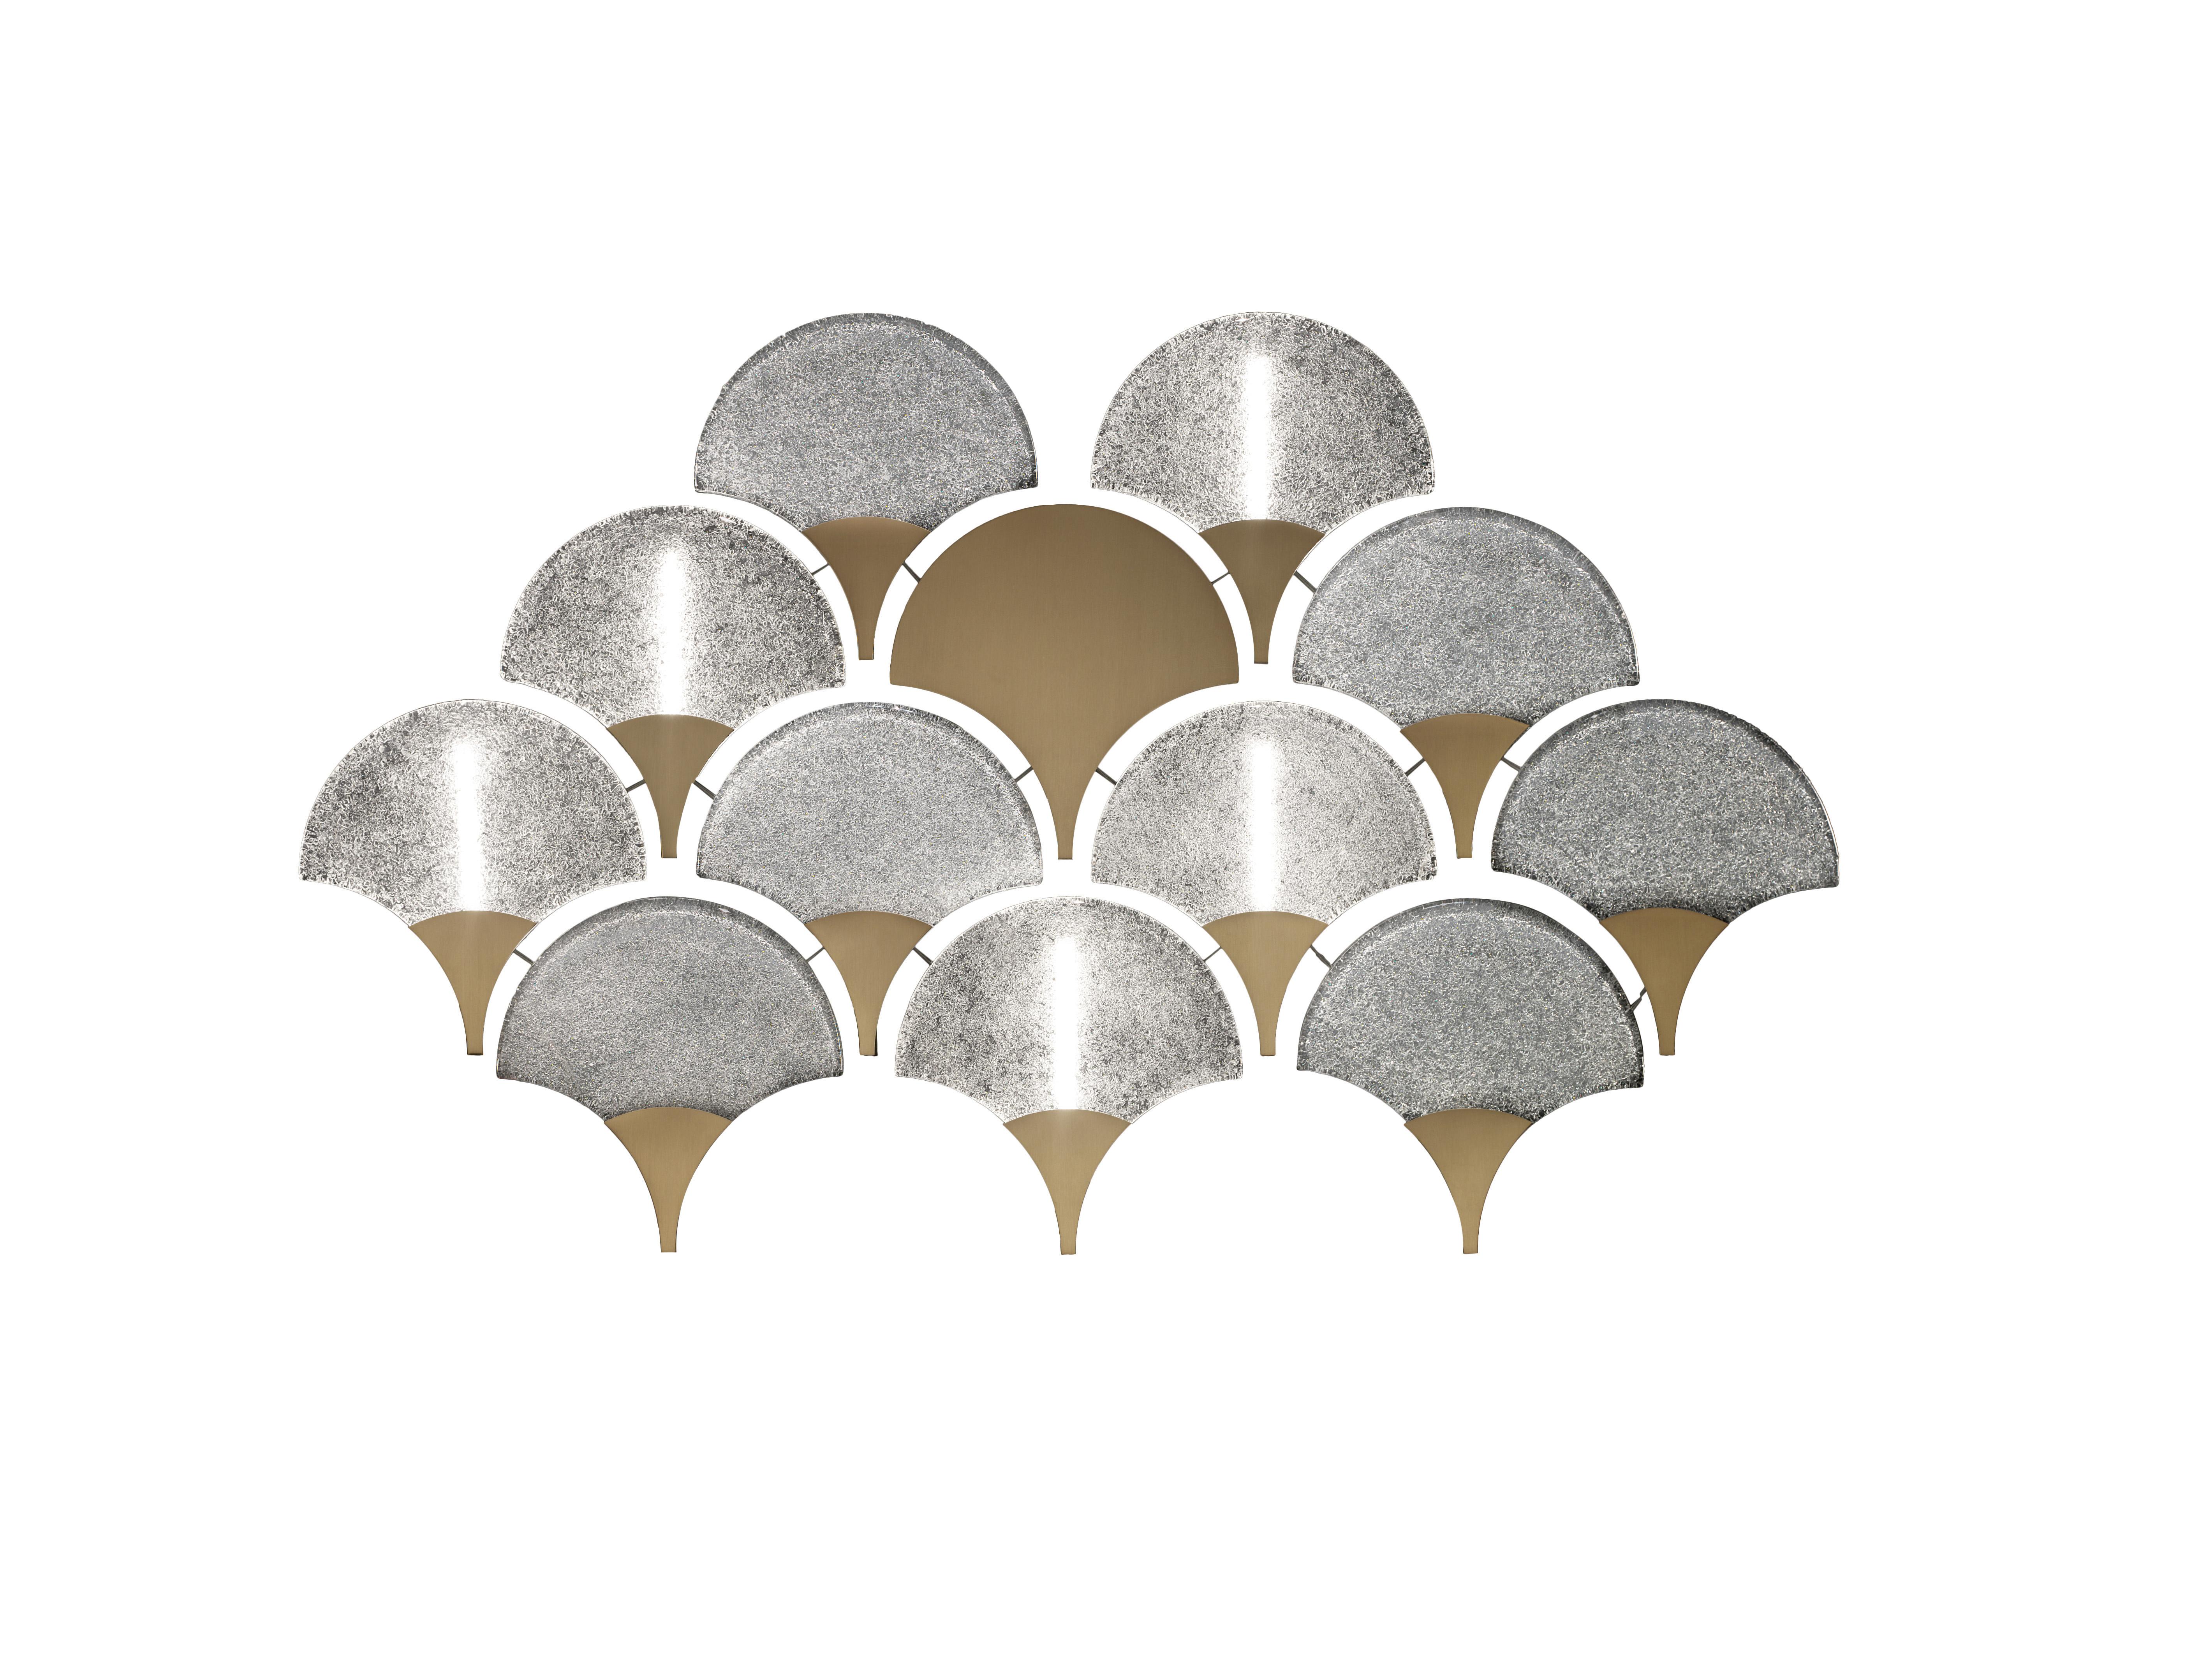 Tuileries 7375 Wall Sconce in Glass with Honey Bronze Finish, by Barovier&Toso